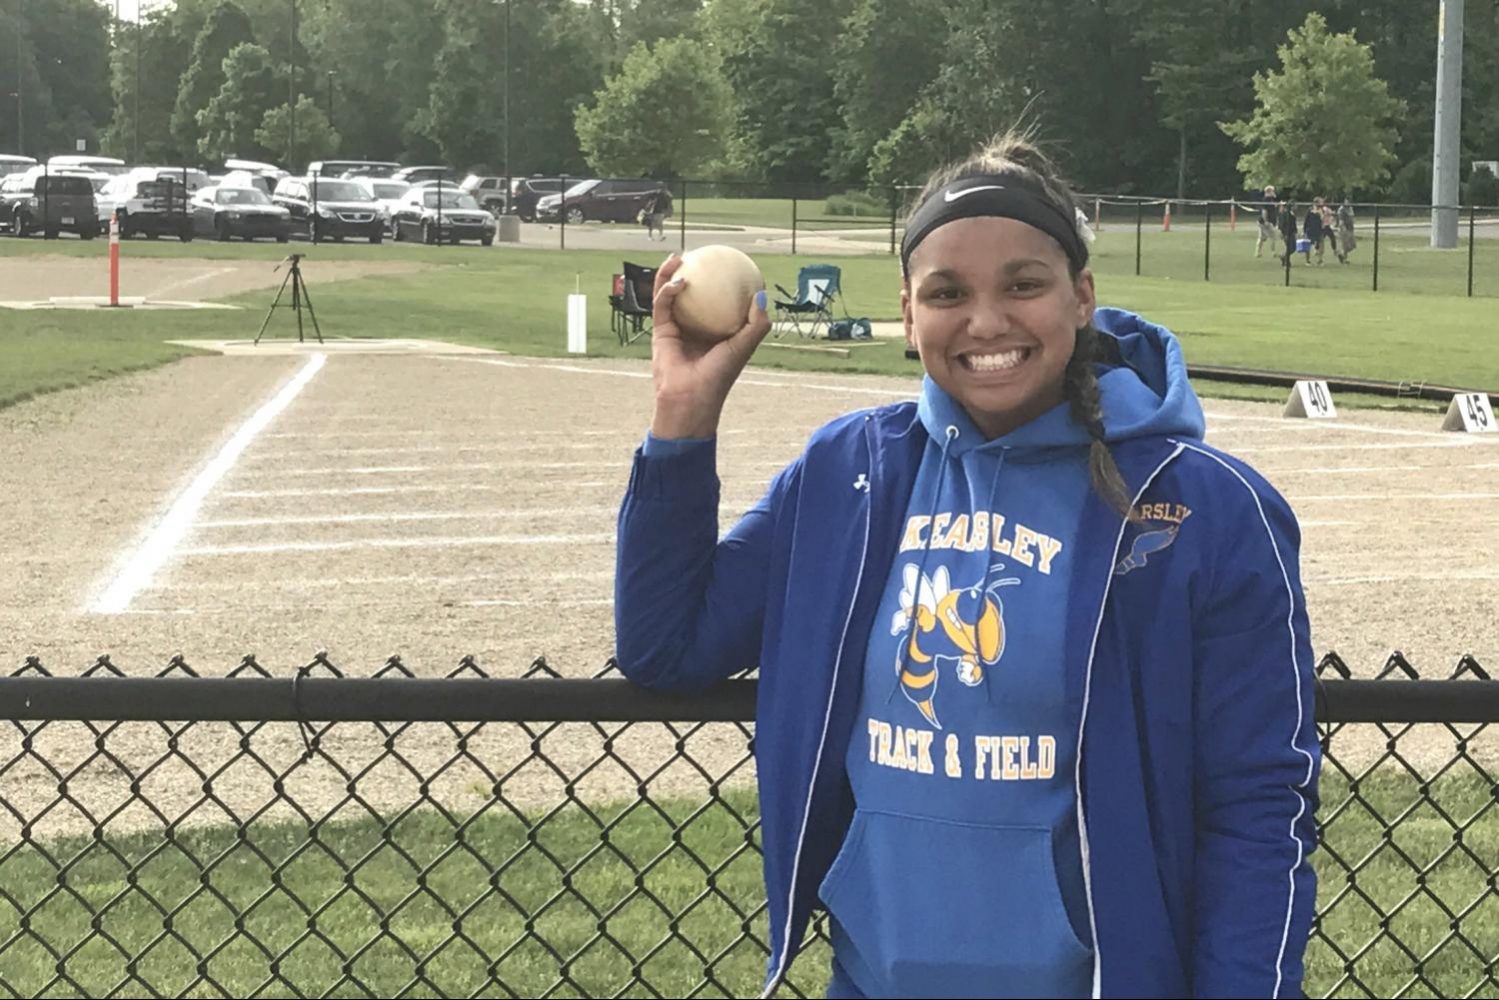 Sophomore+Makenzie+Ramey+holds+the+shot+put+she+threw+at+the+MHSAA+Division+1+state+final+Saturday%2C+June+3%2C+at+East+Kentwood.+It+was+the+first+trip+to+the+state+final+for+Ramey.